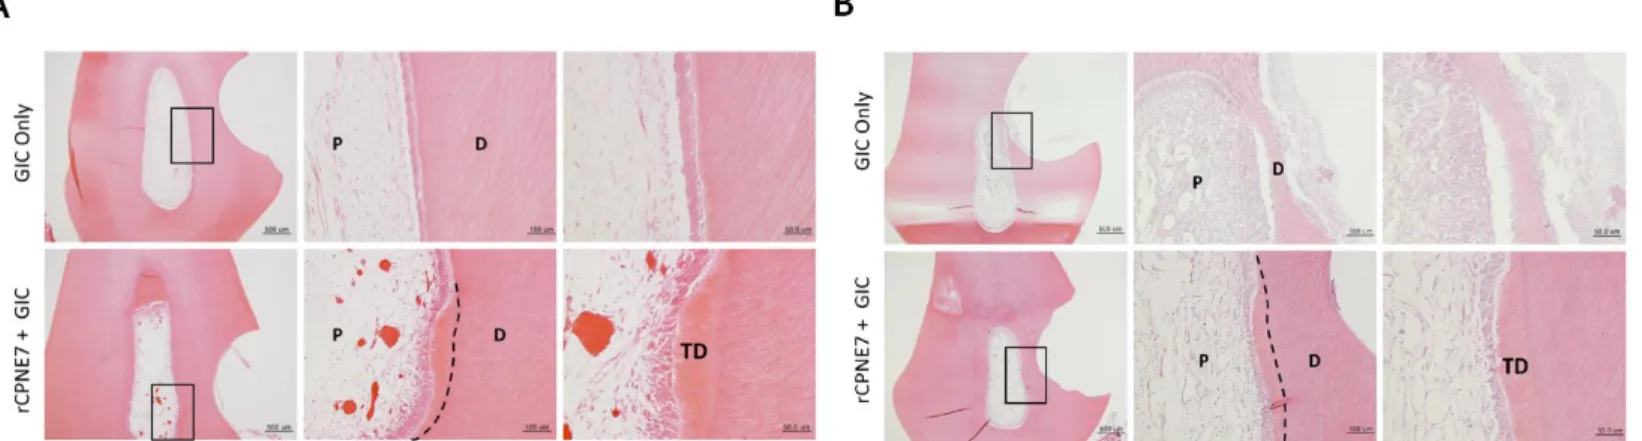 Figure  2.  Histological  analysis  three  weeks  after  the  in  vivo treatment  of  rCPNE7.